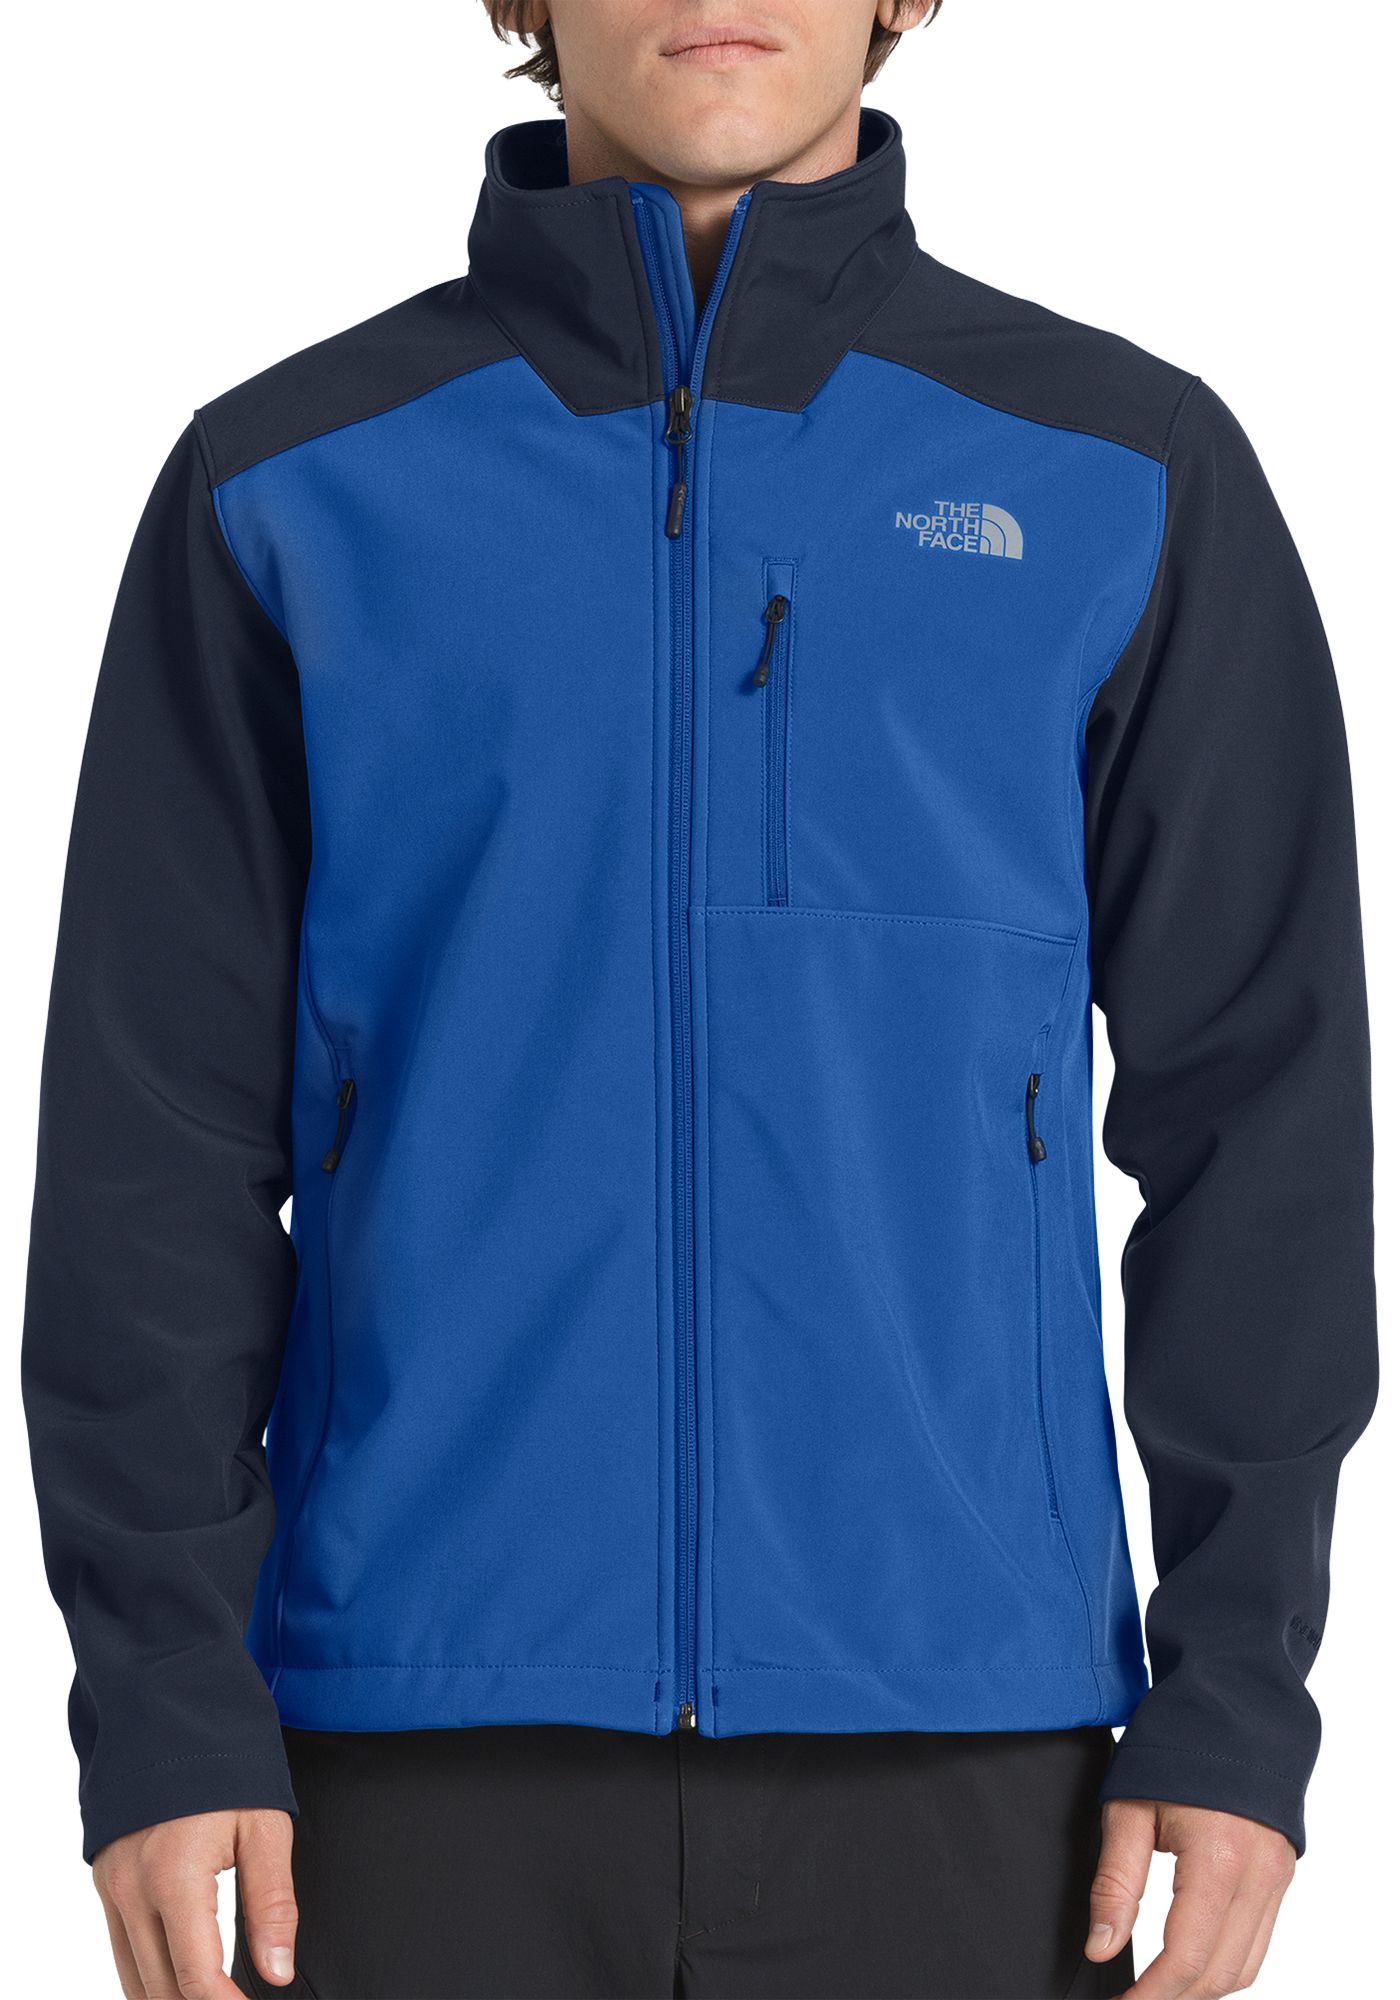 The North Face Apex Bionic 2 Jacket | Best Price Guarantee at DICK'S